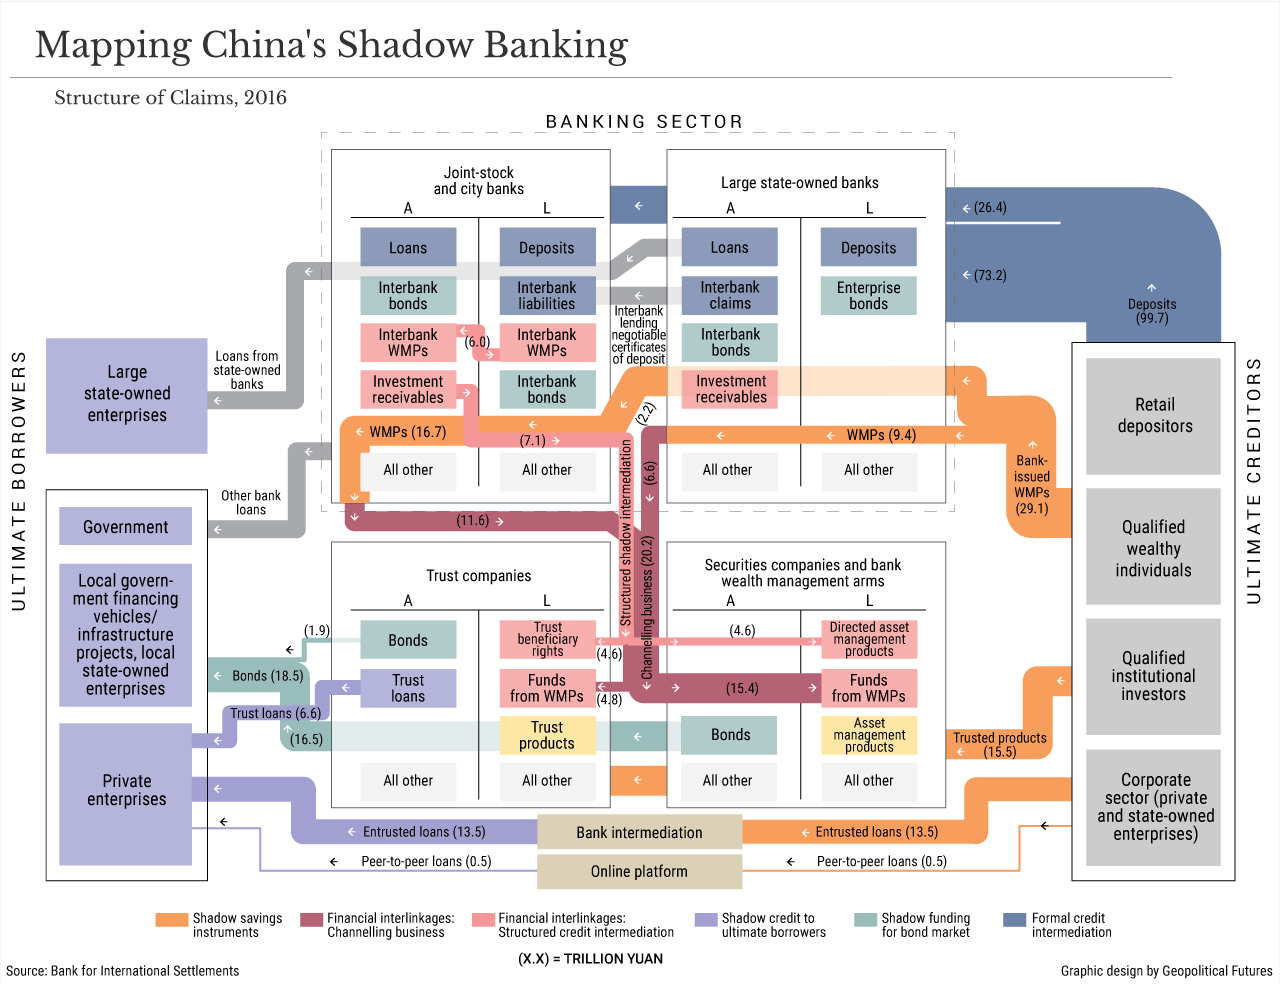 Mapping China's Shadow Banking